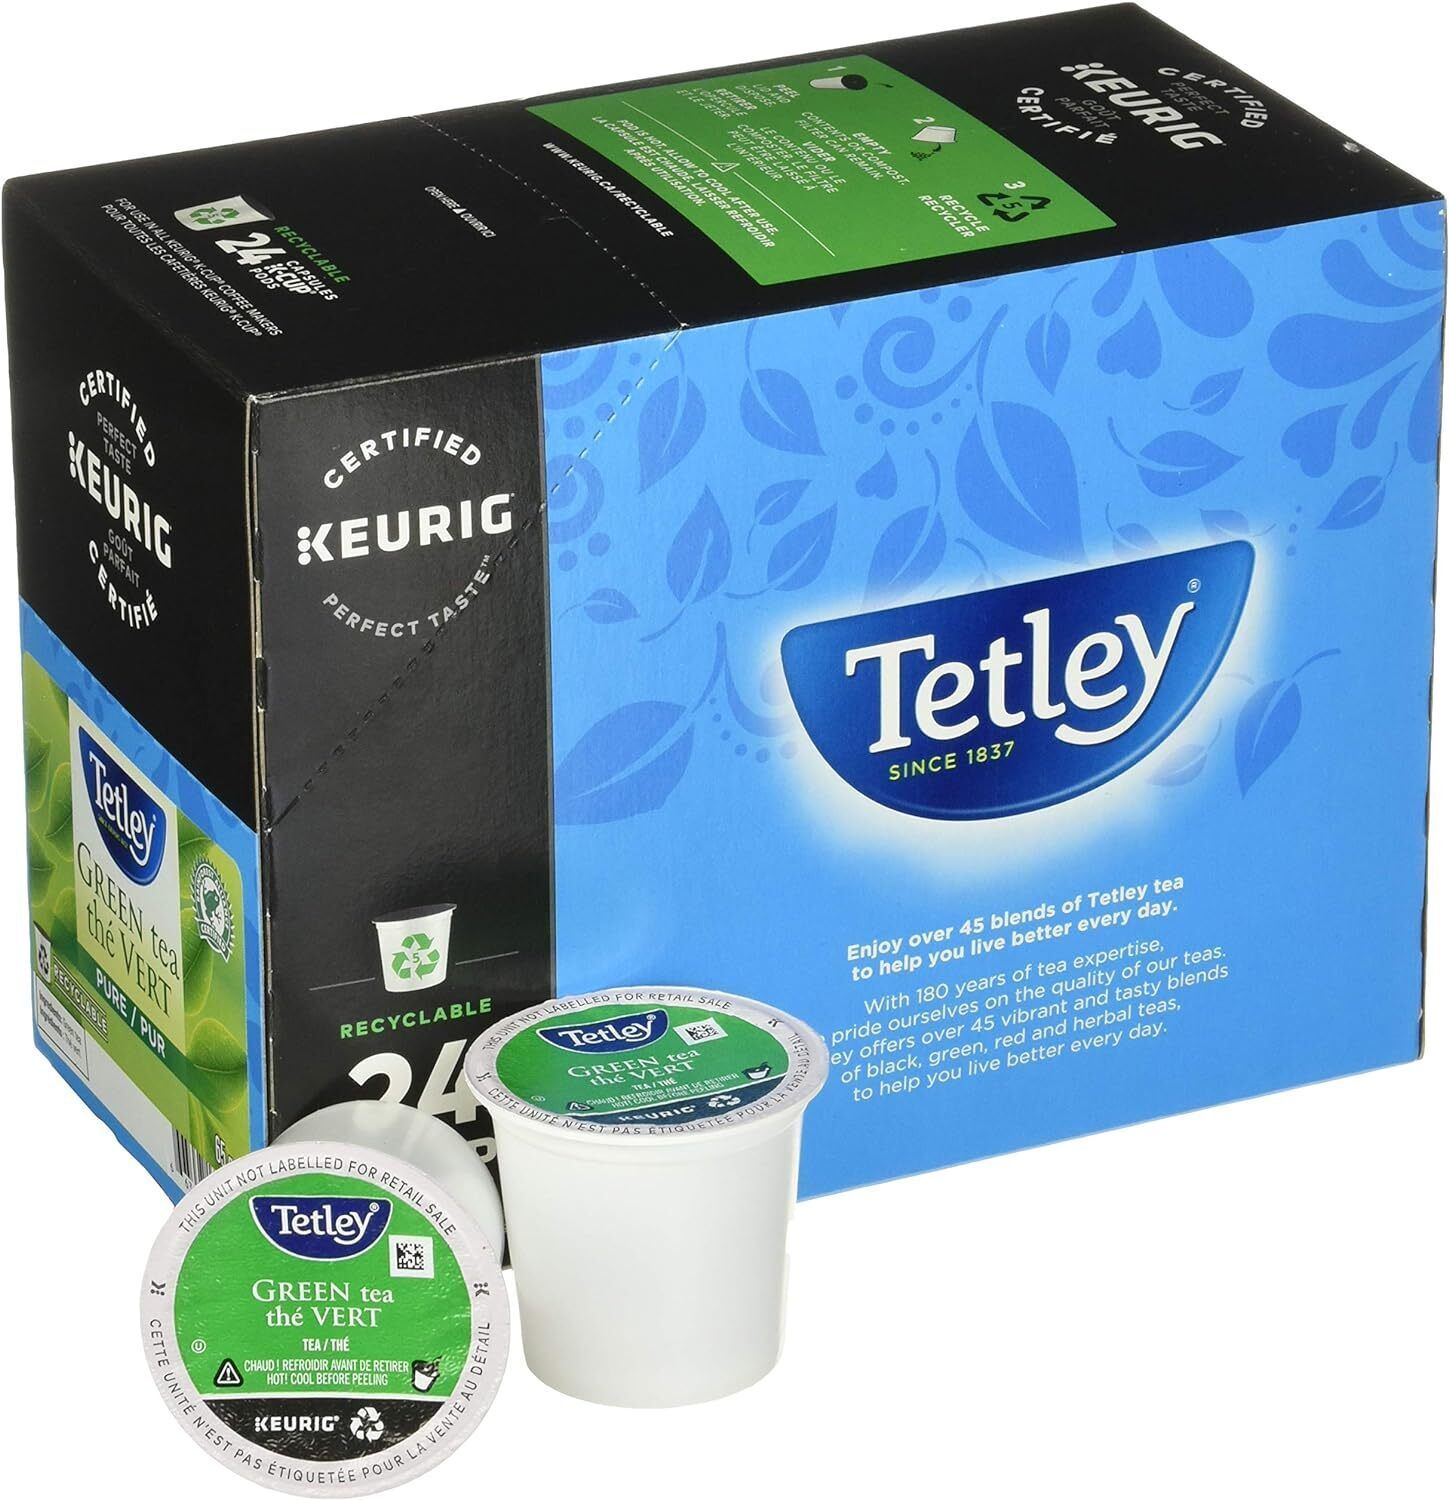 Tetley Green Tea 24 to 144 Count Keurig K cups Pick Any Size FREE SHIPPING - $32.99 - $114.99